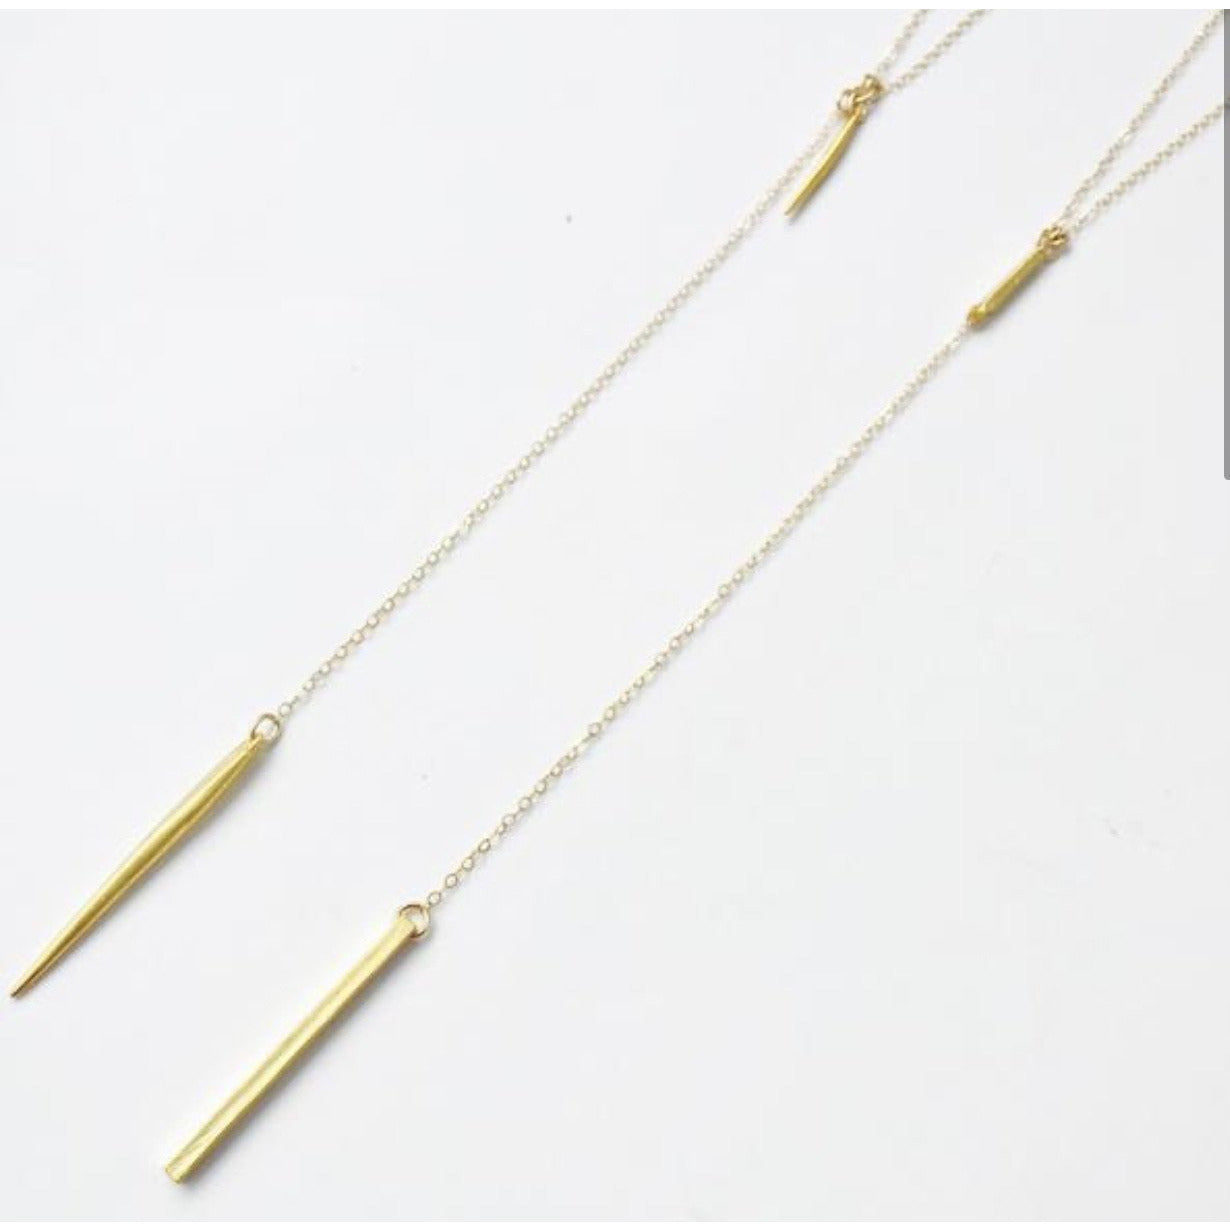 Y Spike Necklace - Glamco Boutique 